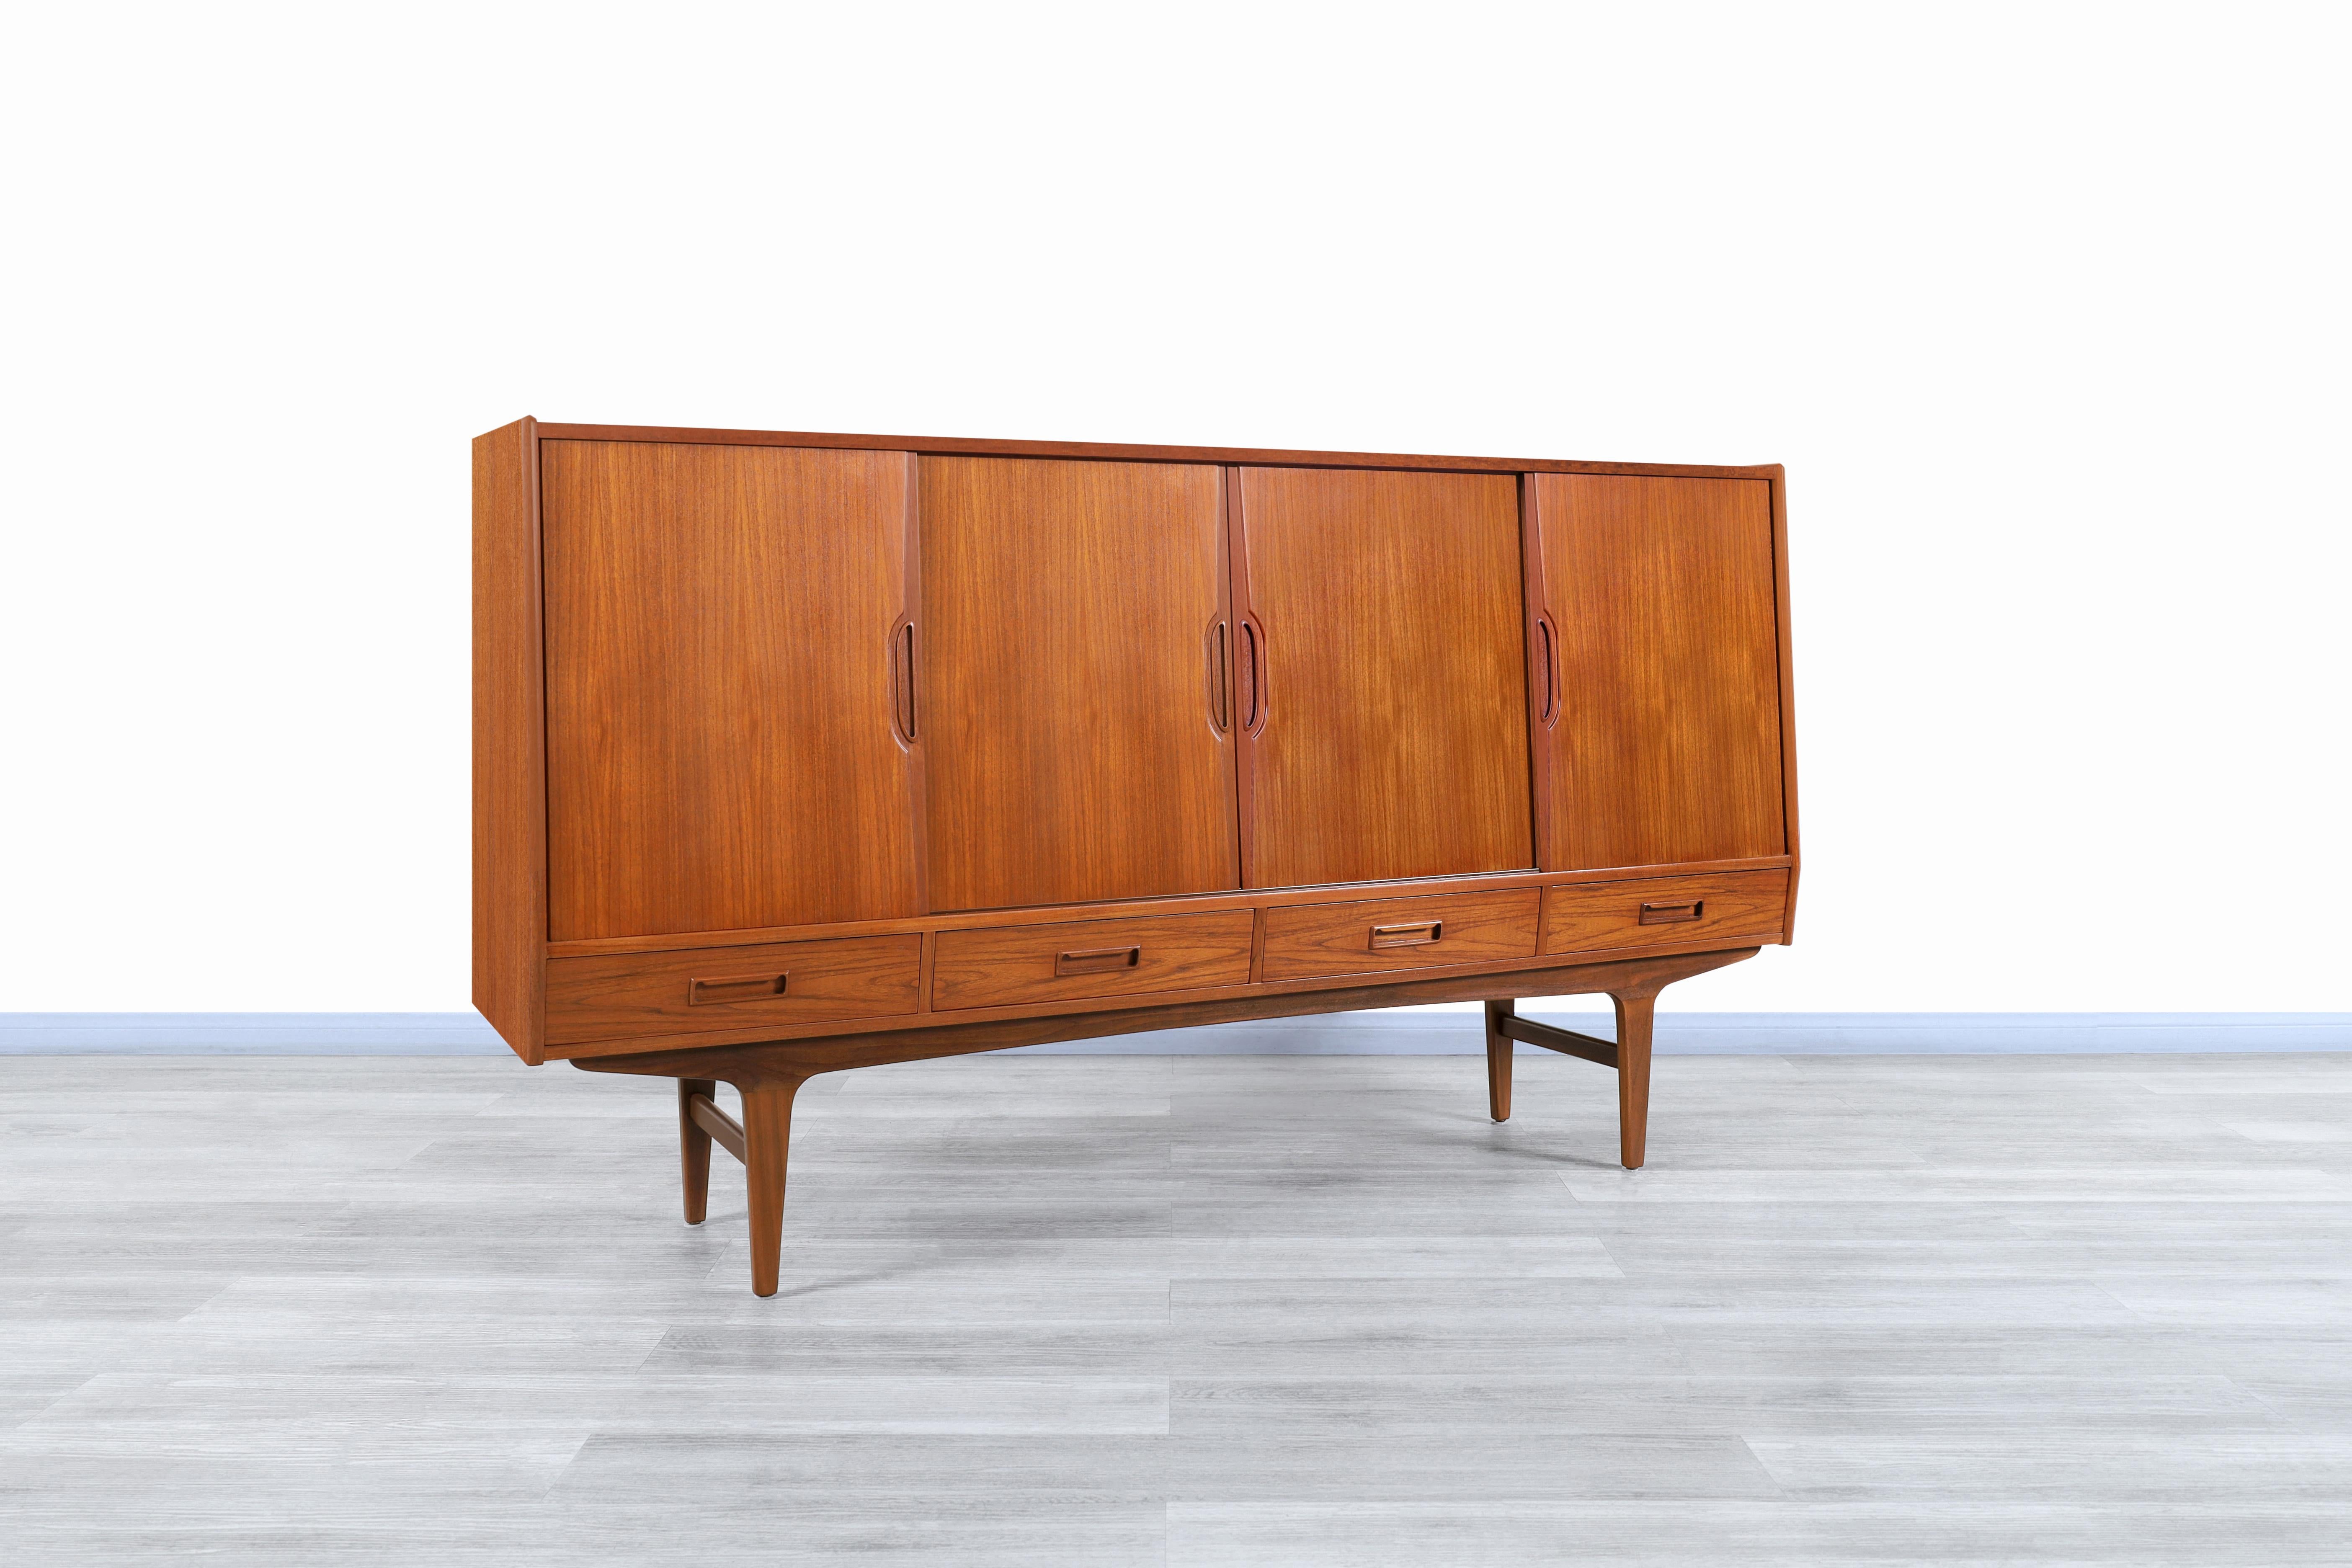 Wonderful Danish modern teak sideboard designed by Børge Seindal for P. Westergaard Møbelfabrik in Denmark, circa 1960s. This sideboard has been constructed from the highest quality teak wood and features a minimalist design that focuses on